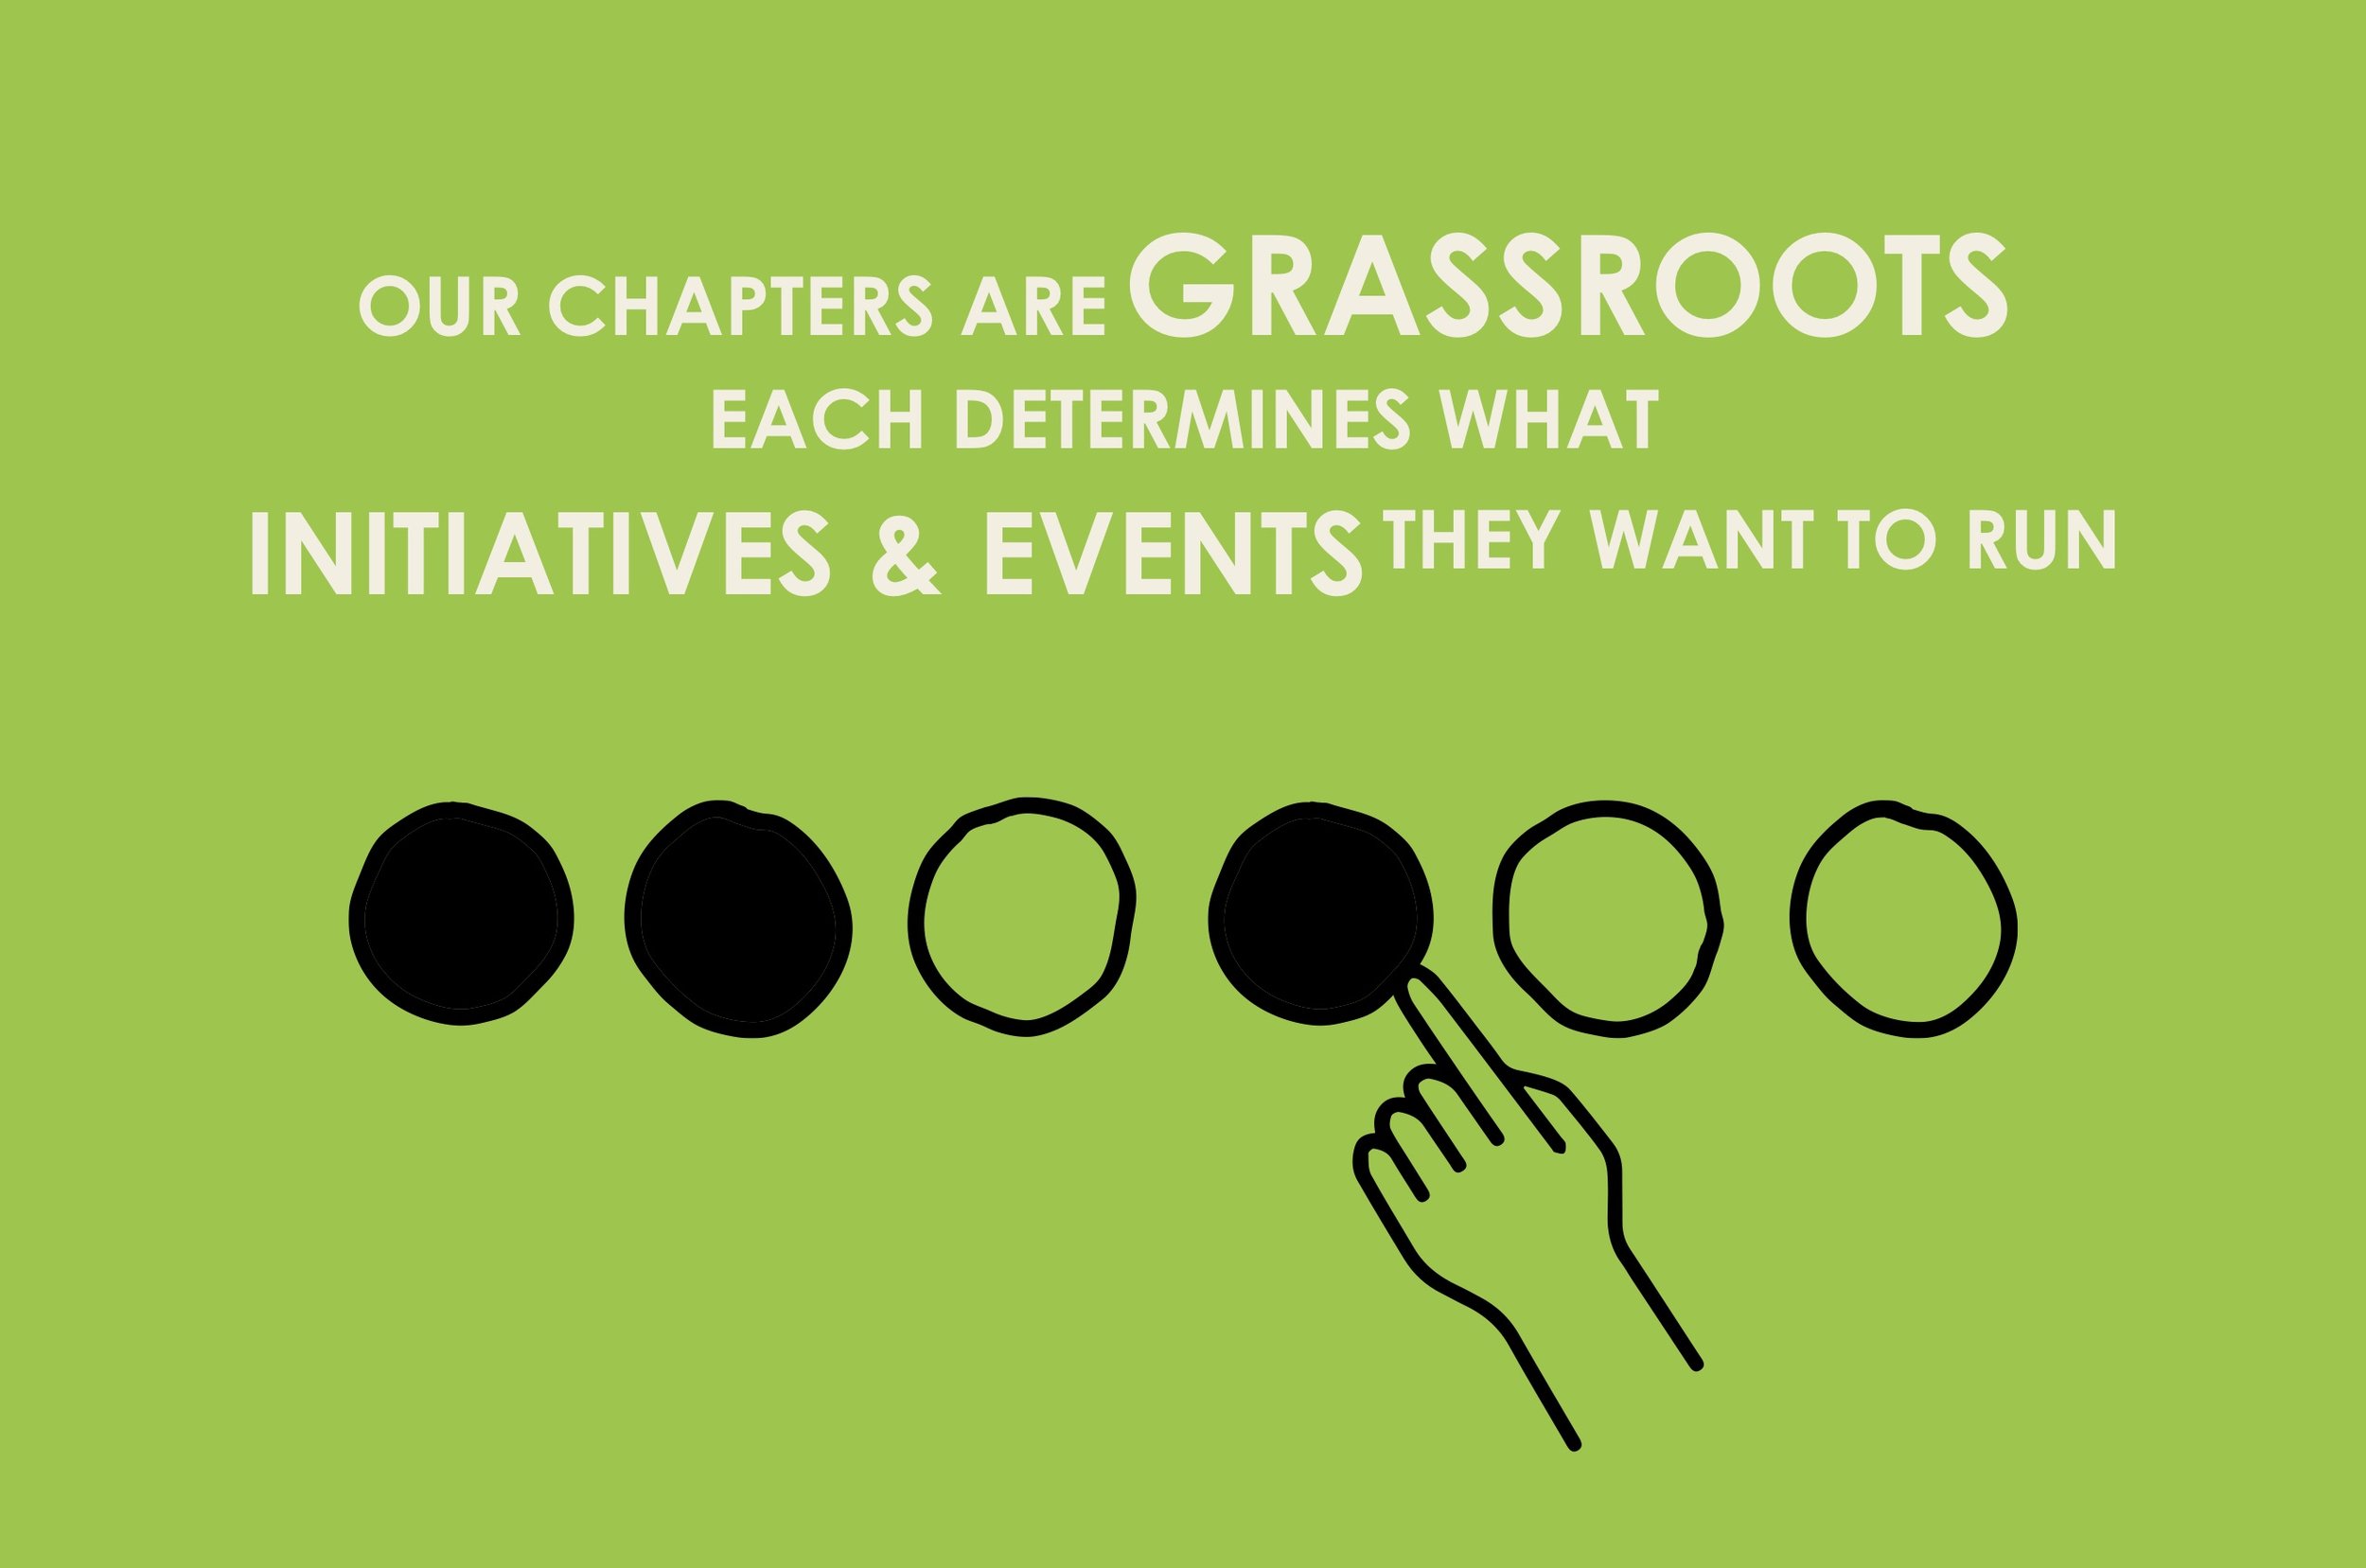 Our chapters are grass roots, each determines what initiatives and events they want to run.